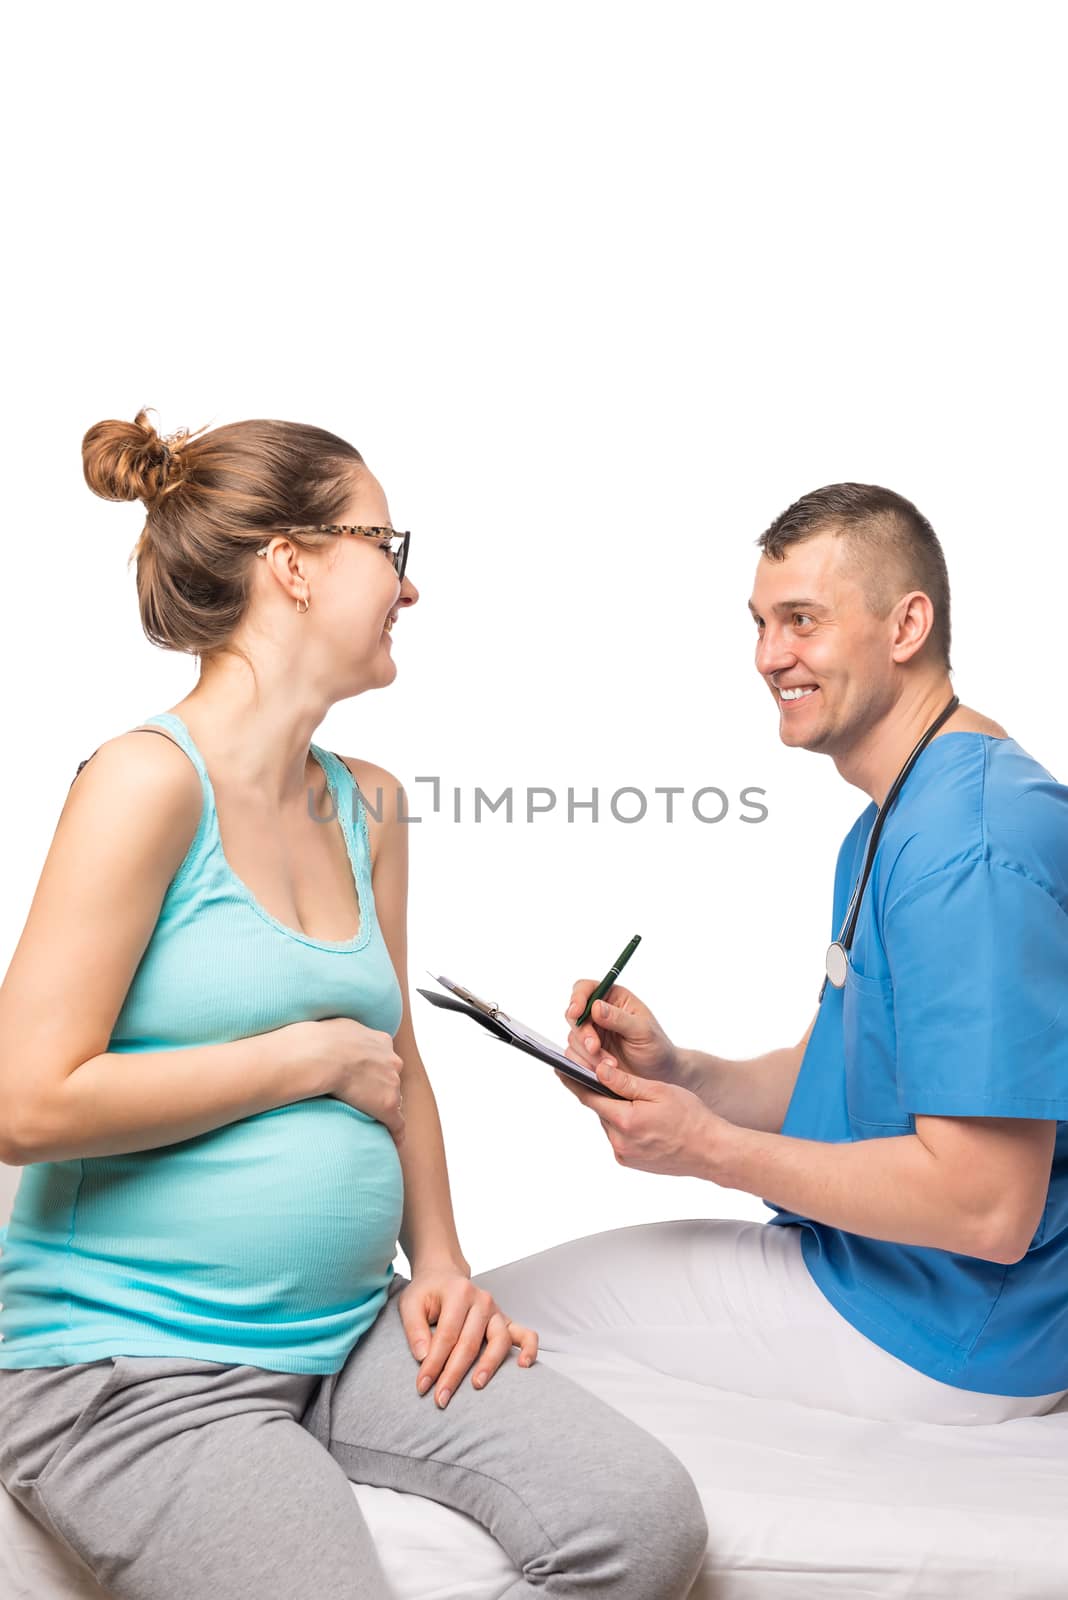 diagnosis of pregnancy portrait of a woman, and the doctor in isolation